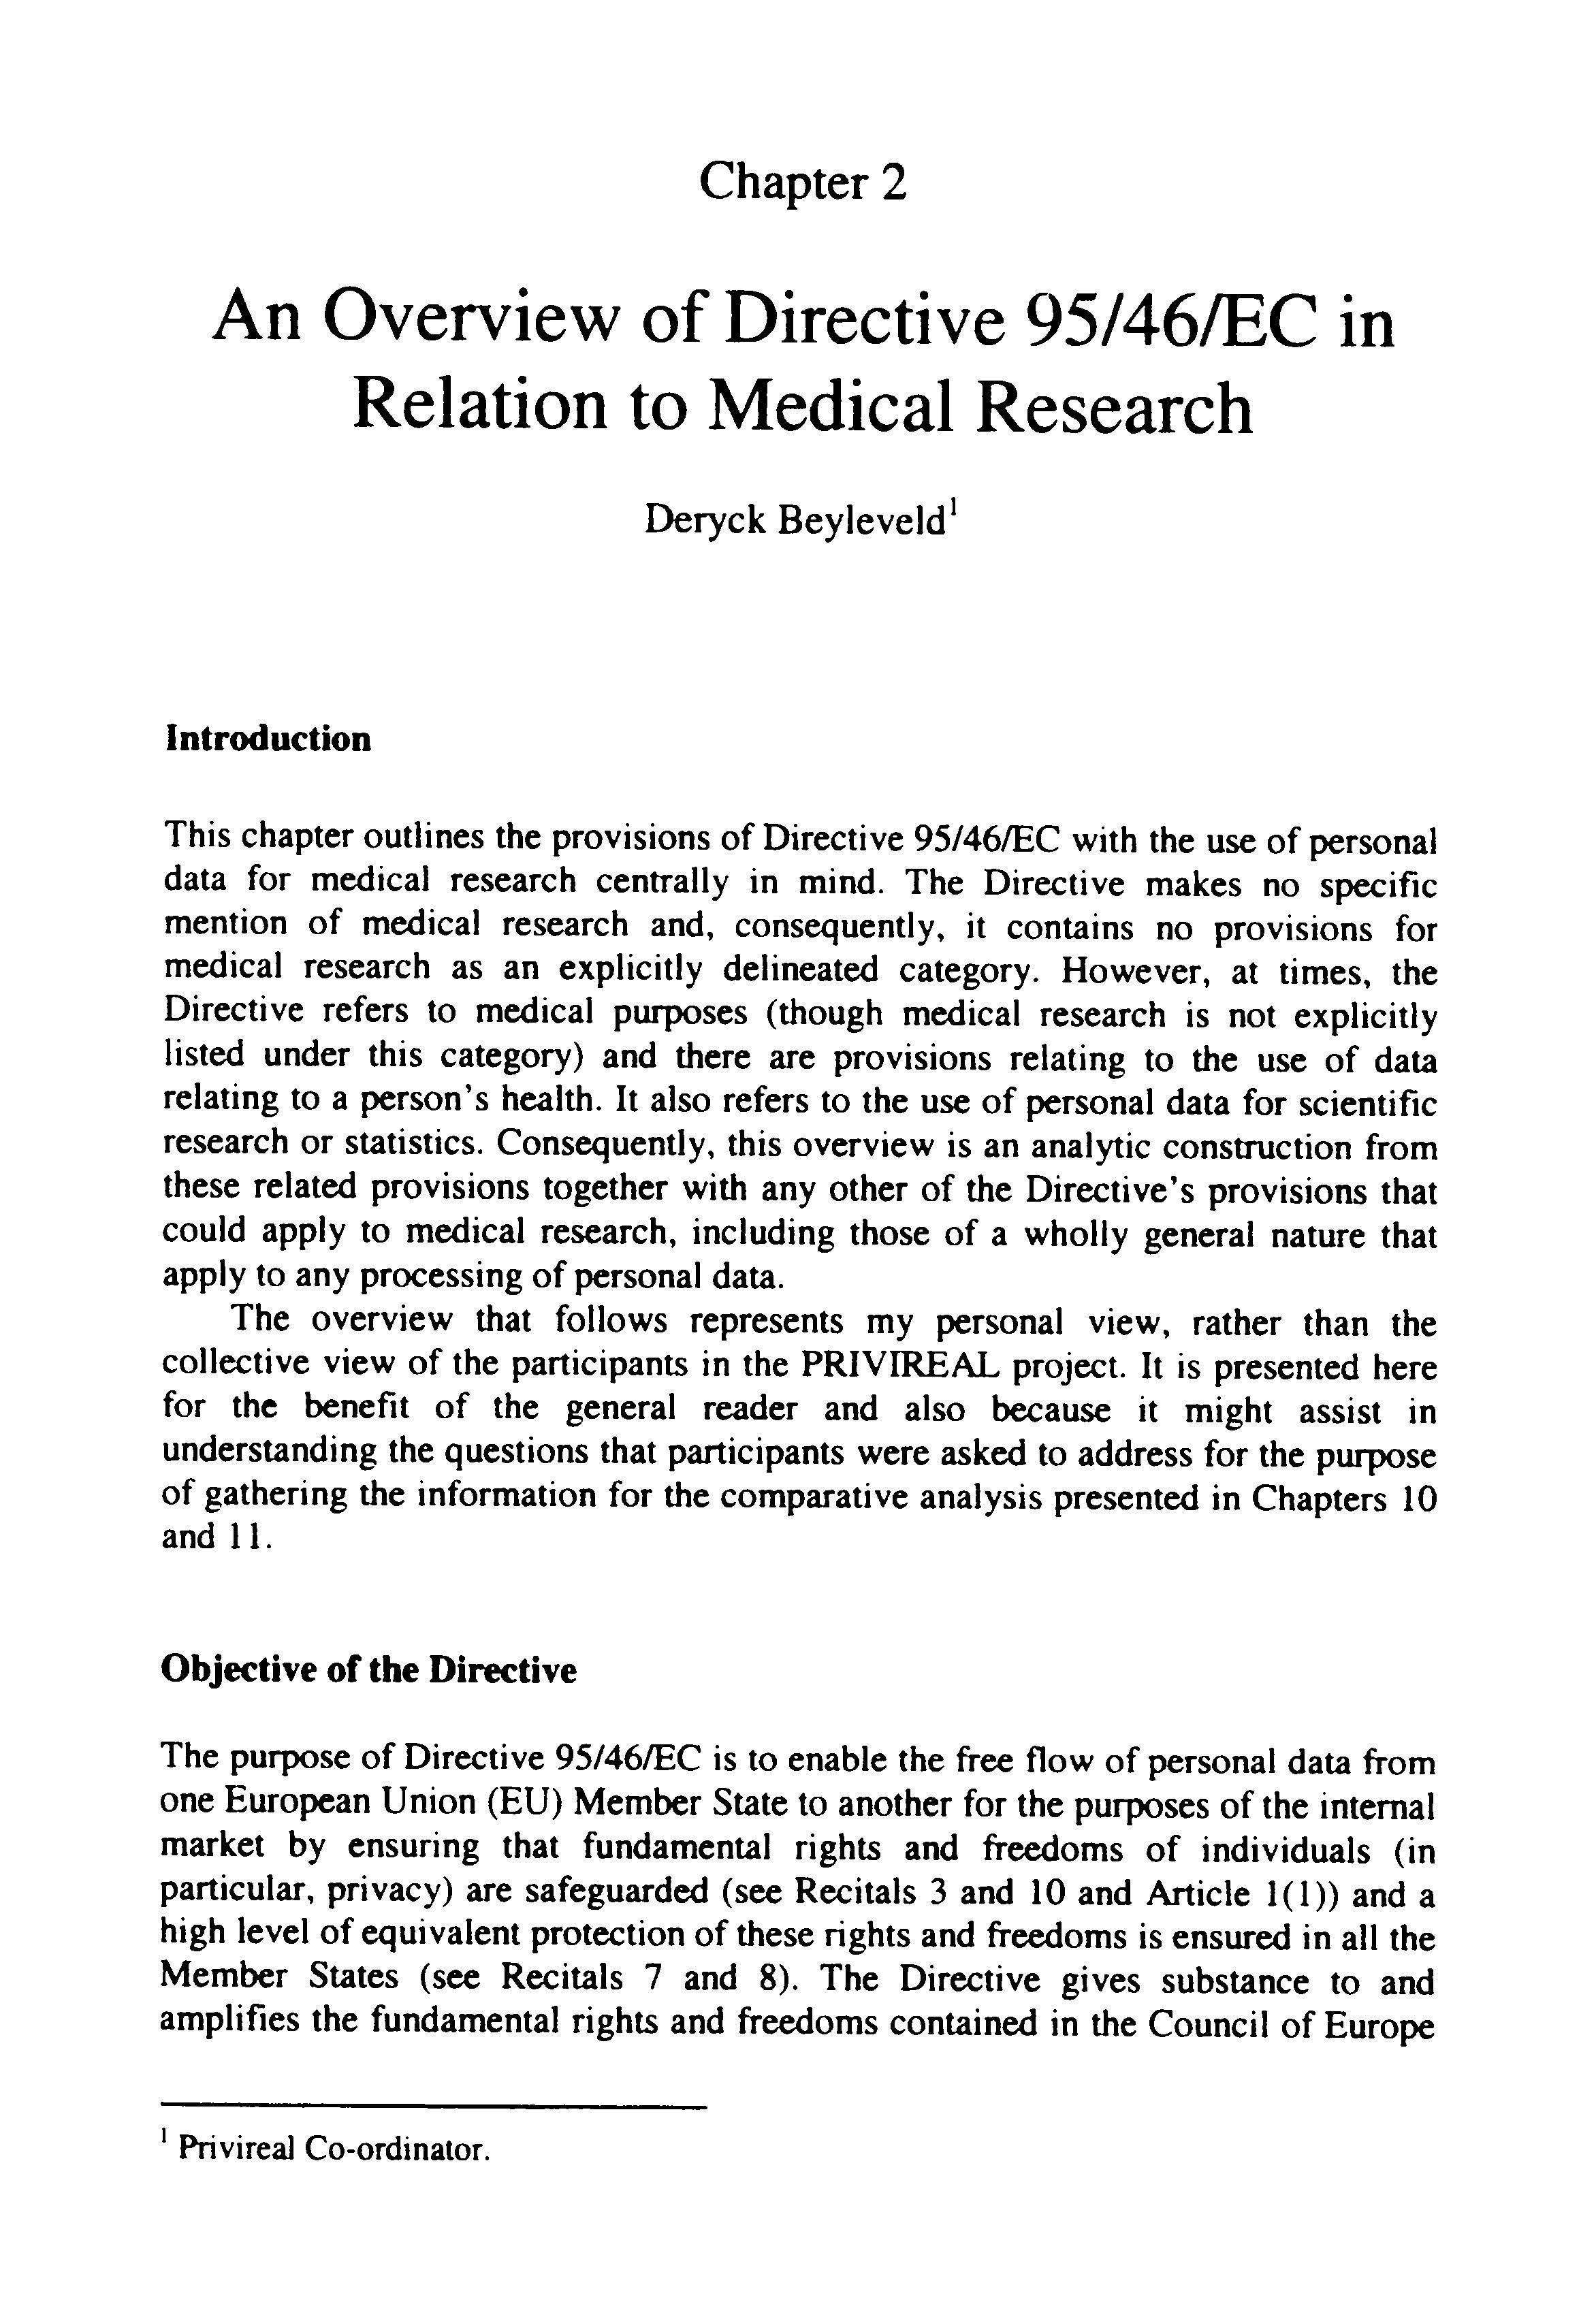 An Overview of Directive 95/46/EC in Relation to Medical Research Thumbnail